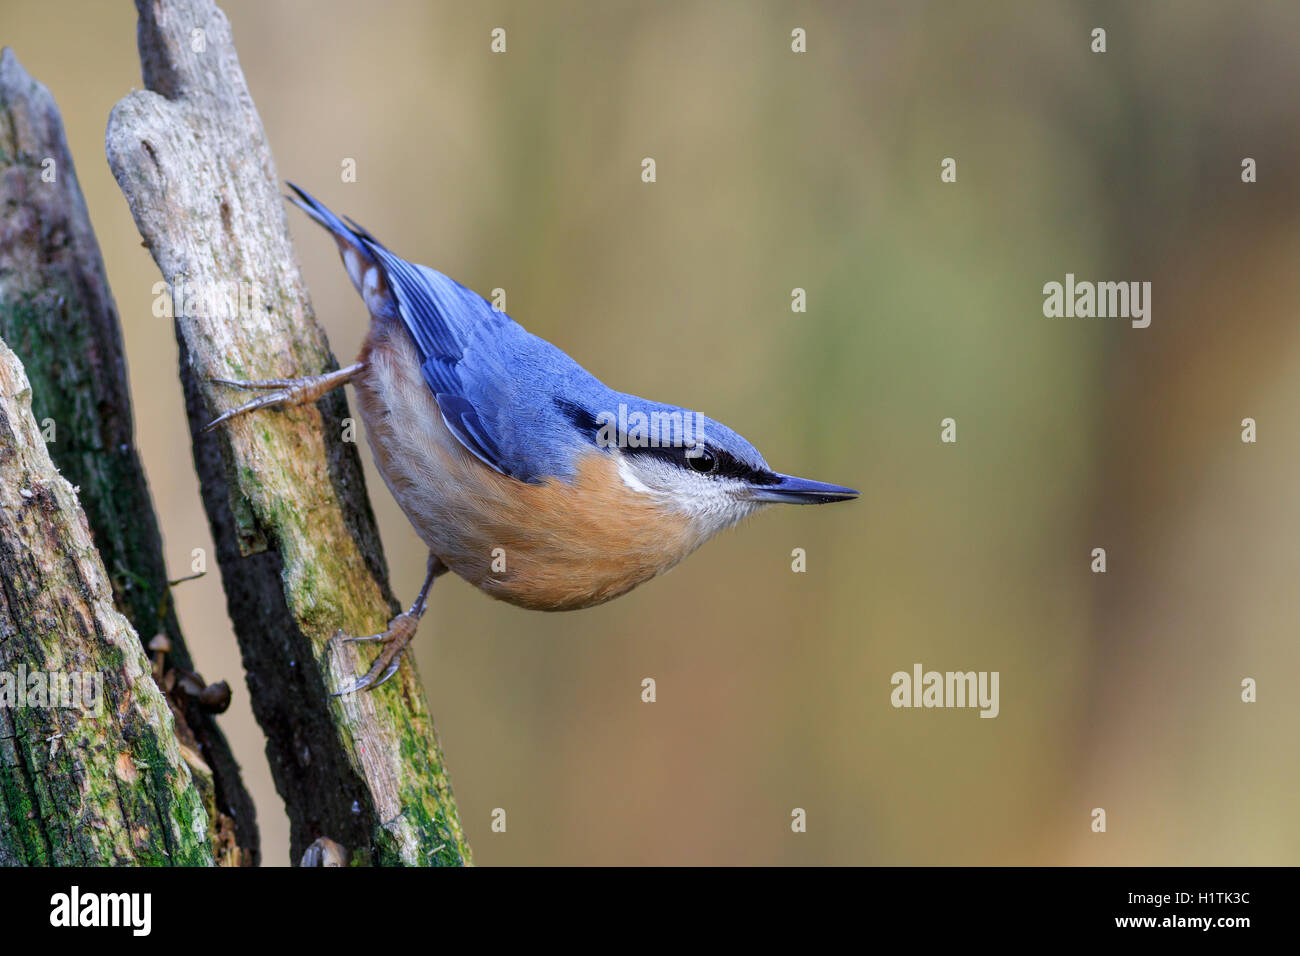 Alert nuthatch perched on a tree stump Stock Photo